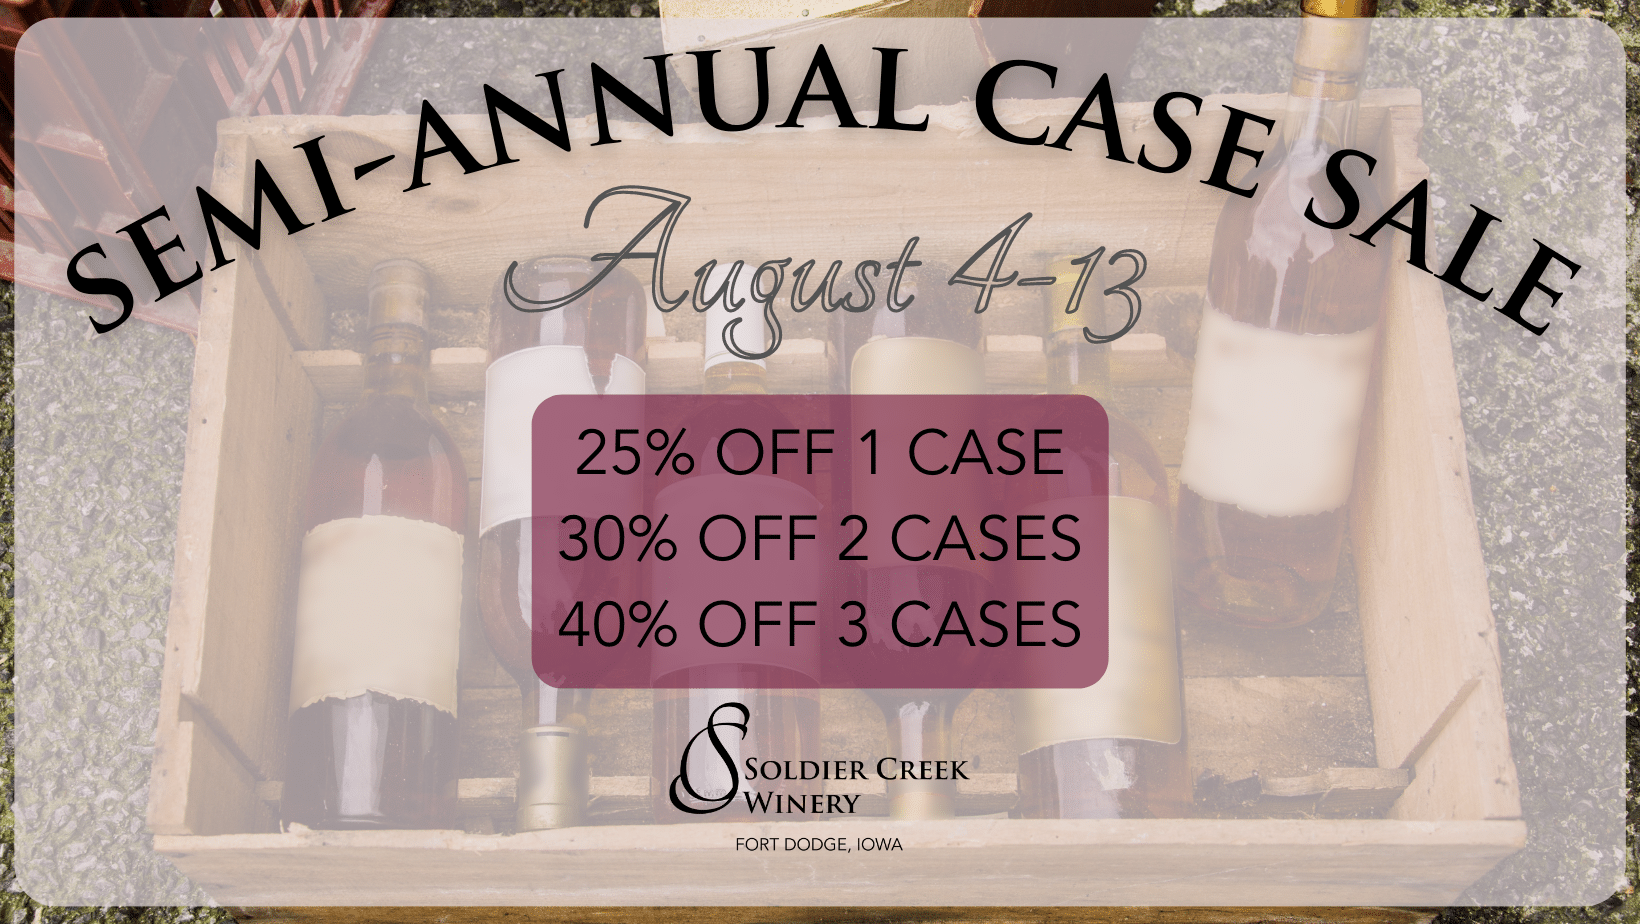 semi annual case sale at soldier creek winery from august 4-13. online or in-store. 25% off 1 case (12 bottles), 30% off 2 cases (24 bottles), or 40% off 3+ cases (36+ bottles).